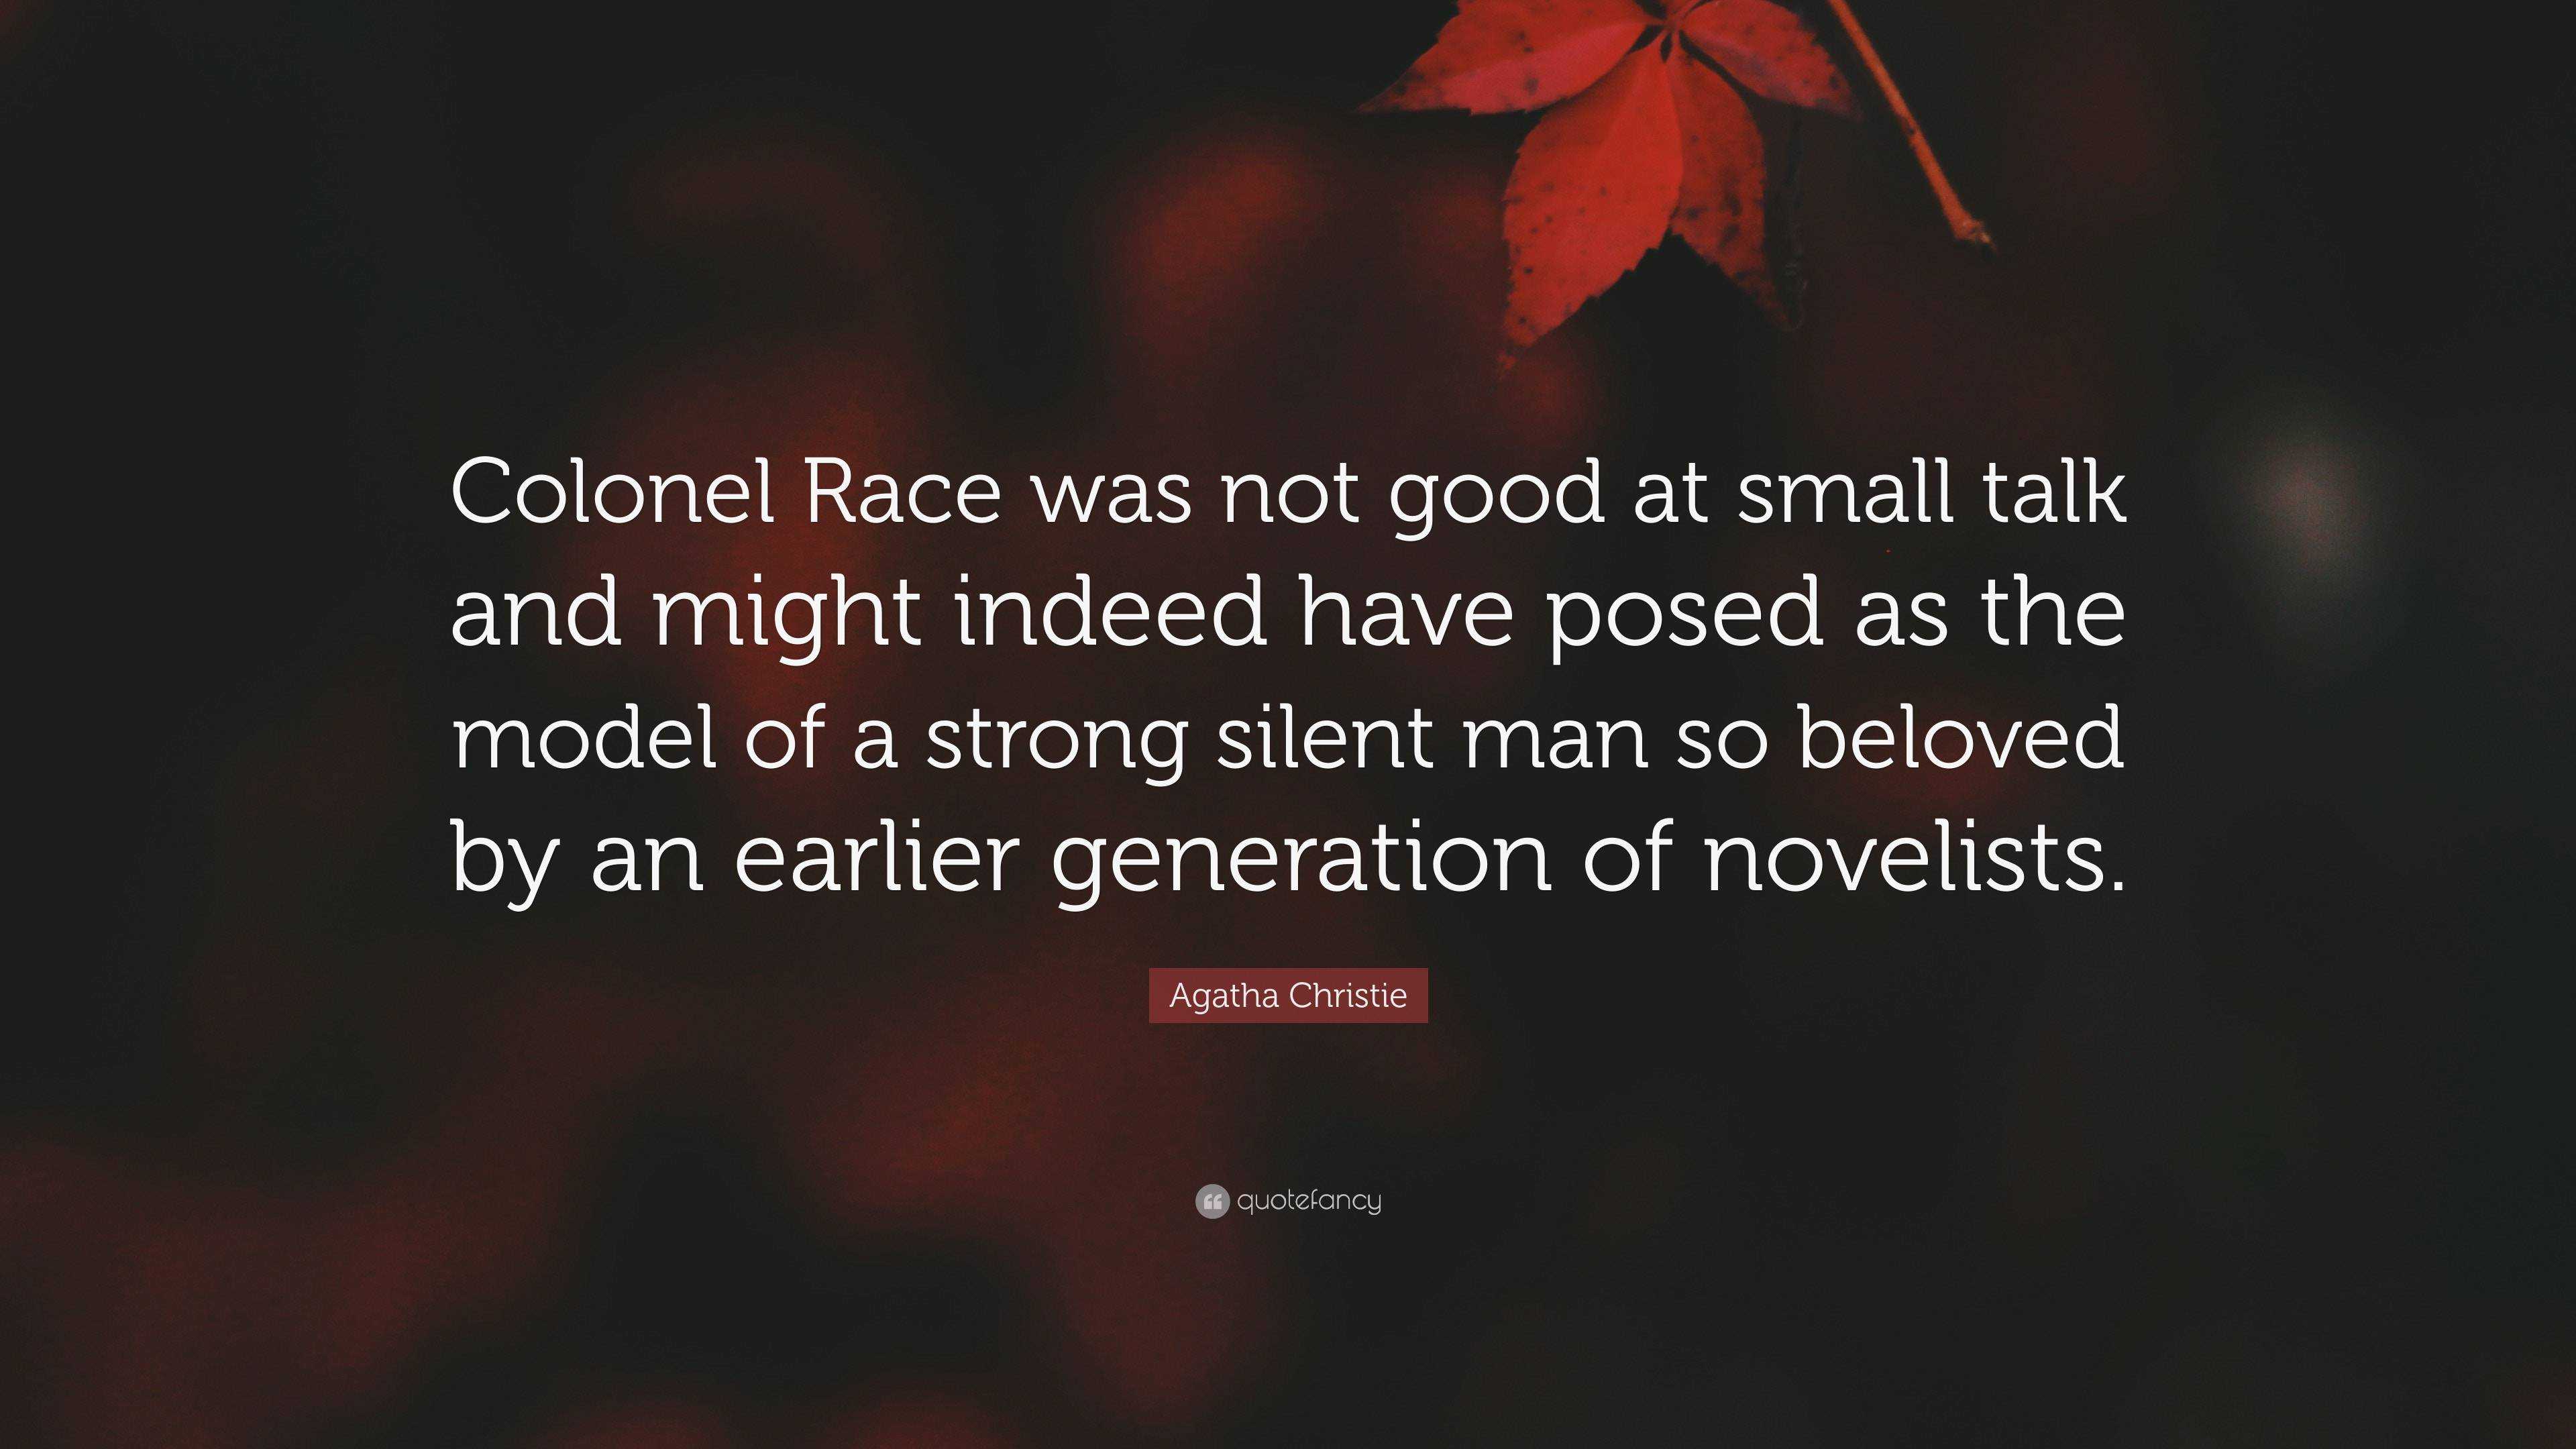 Agatha Christie Quote “colonel Race Was Not Good At Small Talk And Might Indeed Have Posed As